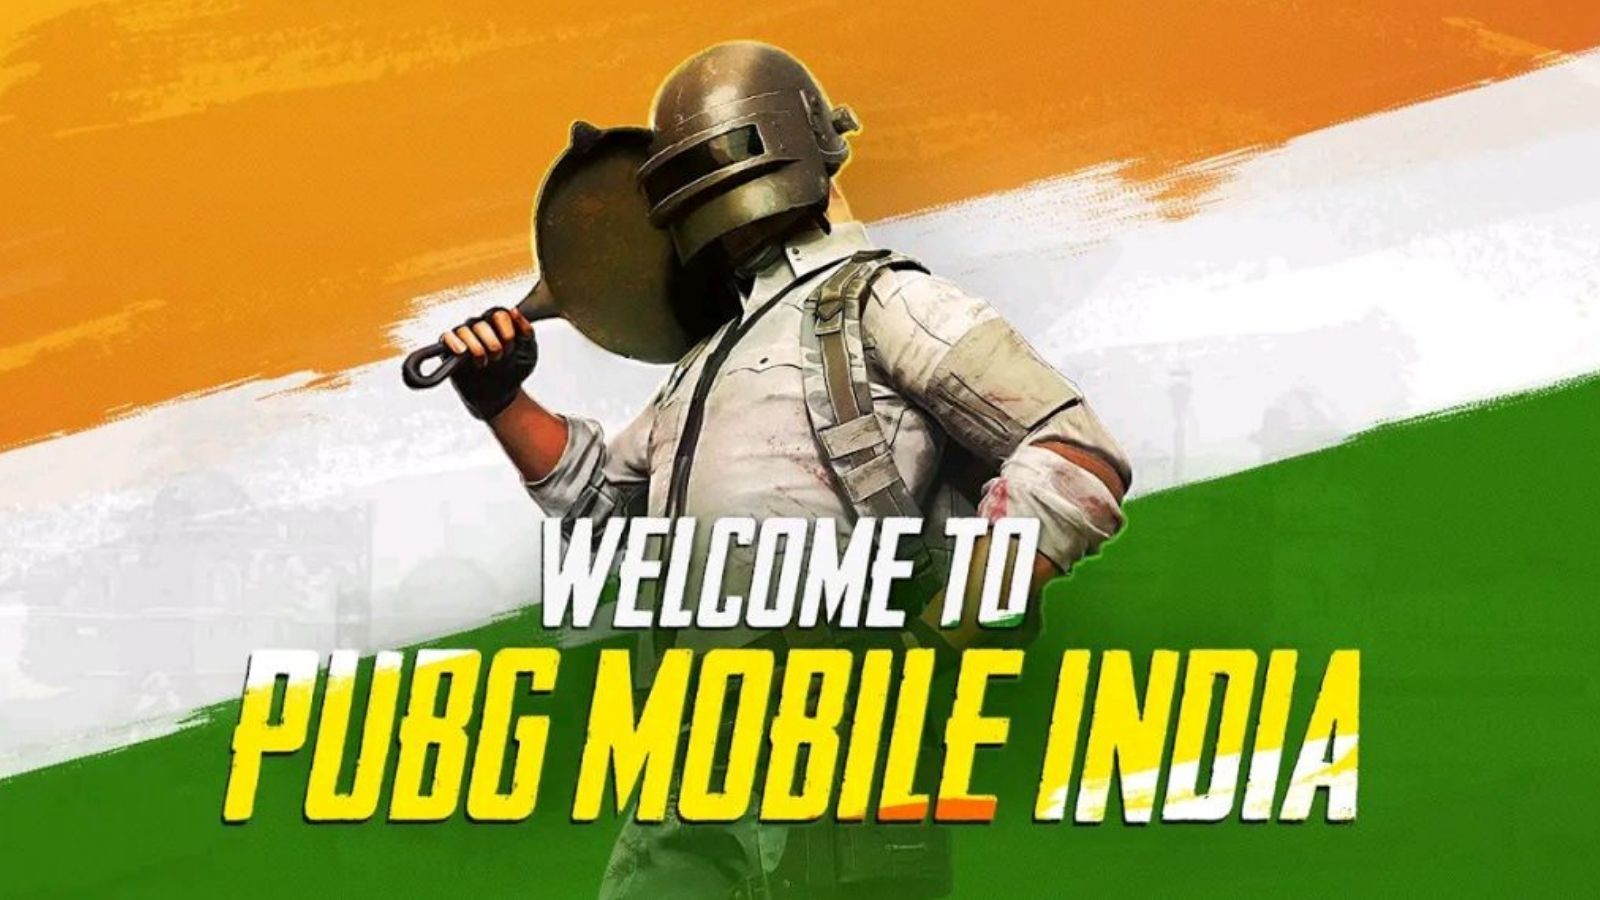 Battlegrounds Mobile India Alleged Listing Spotted on Play Store and it is Plastered With PUBG Mobile India Moniker